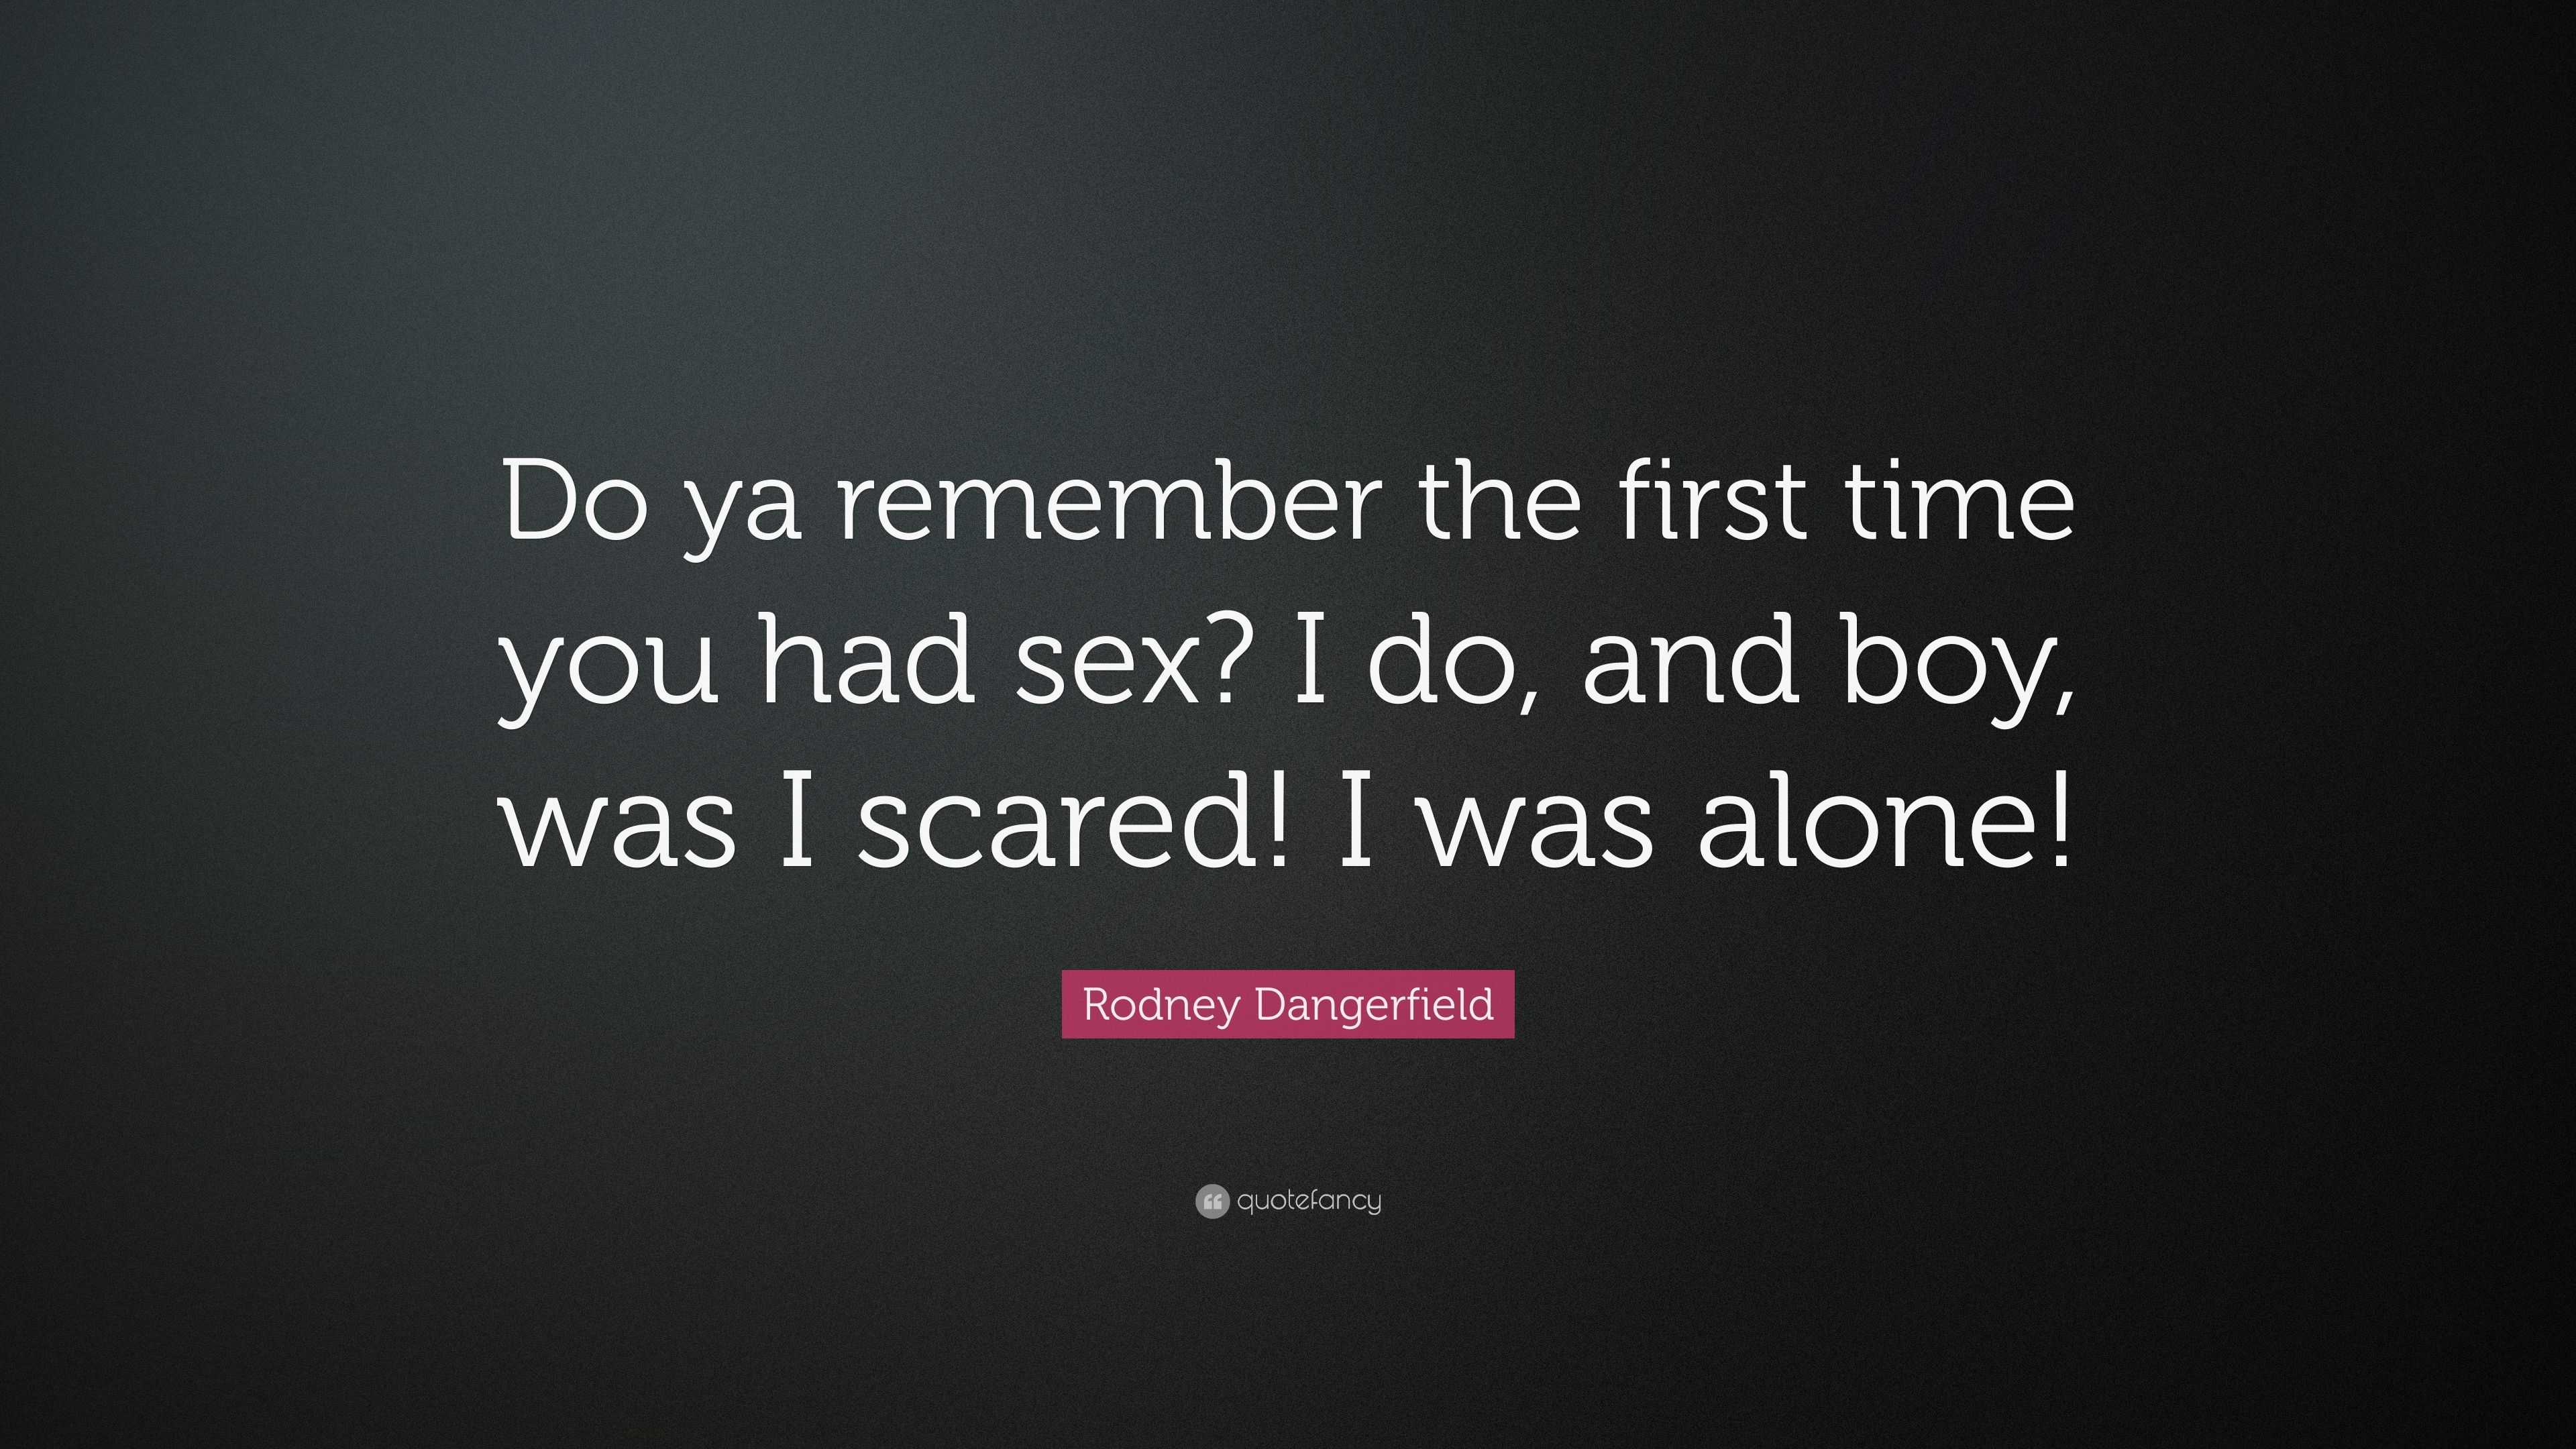 Rodney Dangerfield Quote “Do ya remember the first time you had sex? I do, and boy,